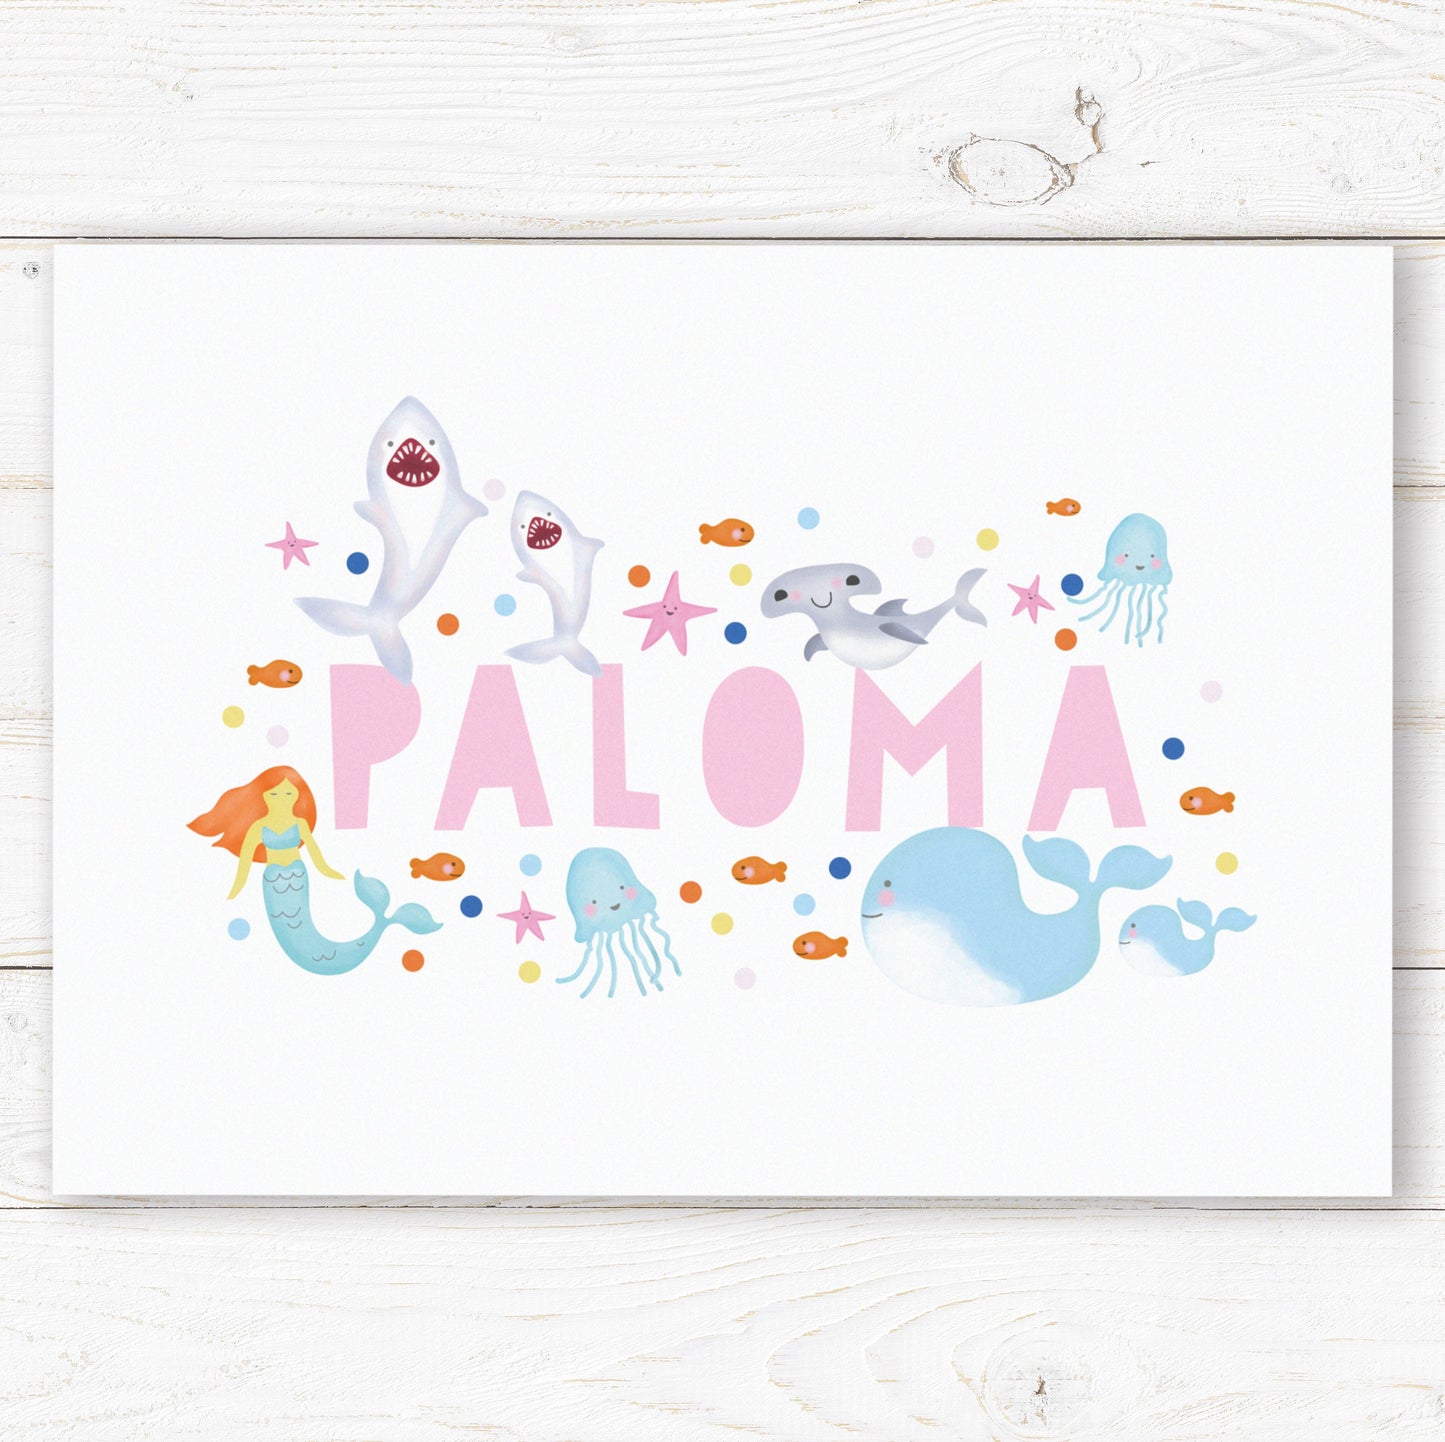 Under The Sea Name Print. Nursery Childs Bedroom. New Baby Gift. Personalised Name Print. Child's Birthday Present. Naming Day Wall Art